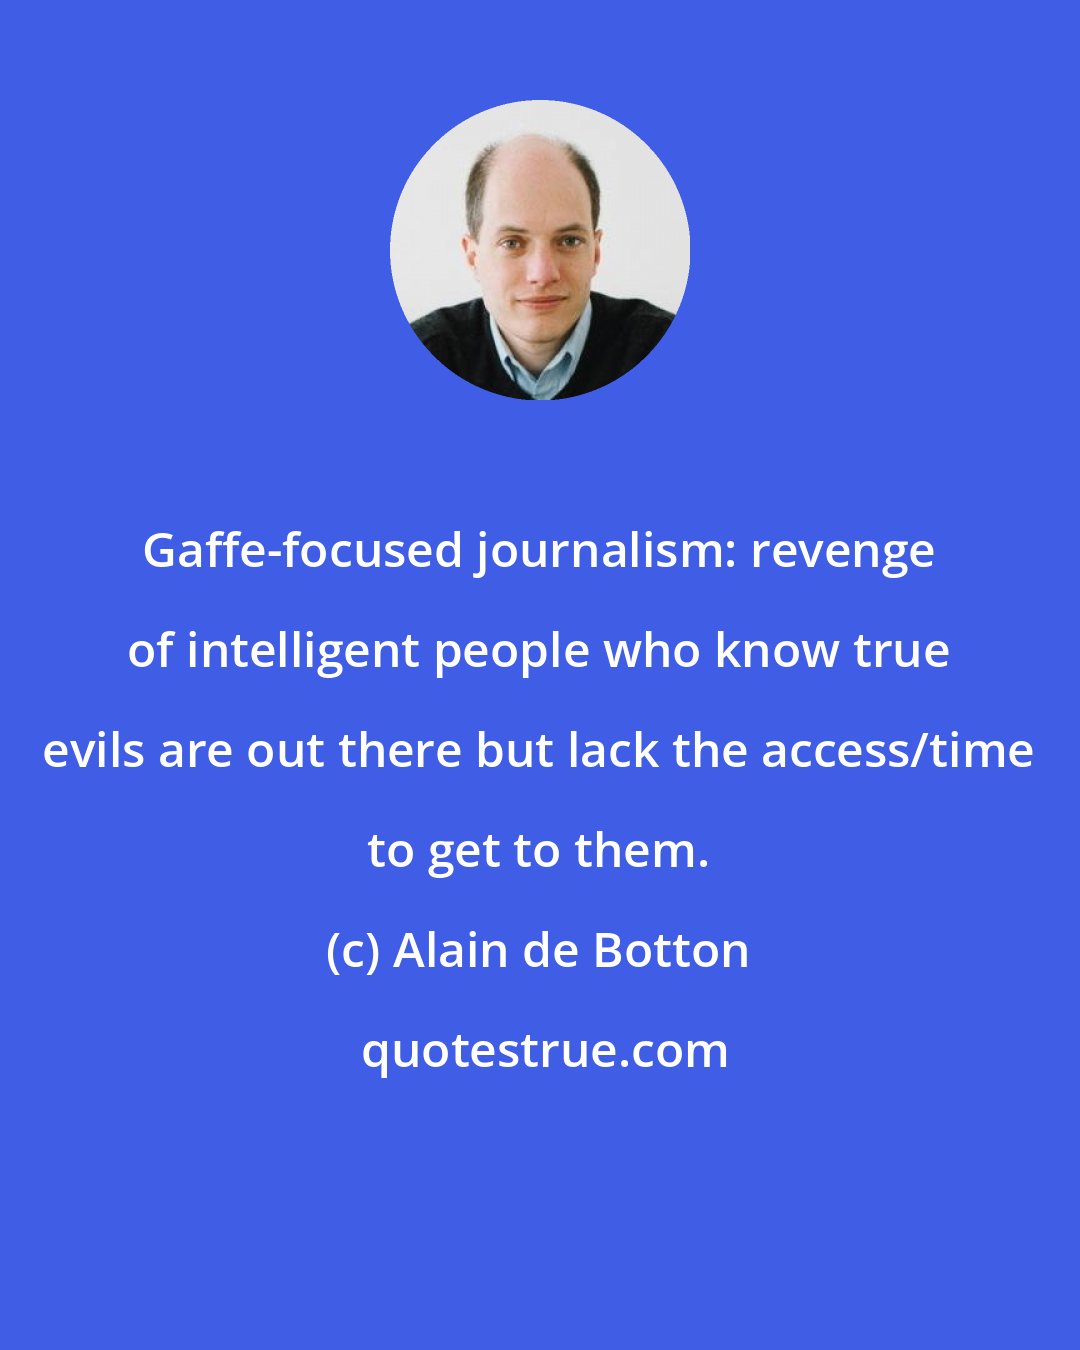 Alain de Botton: Gaffe-focused journalism: revenge of intelligent people who know true evils are out there but lack the access/time to get to them.